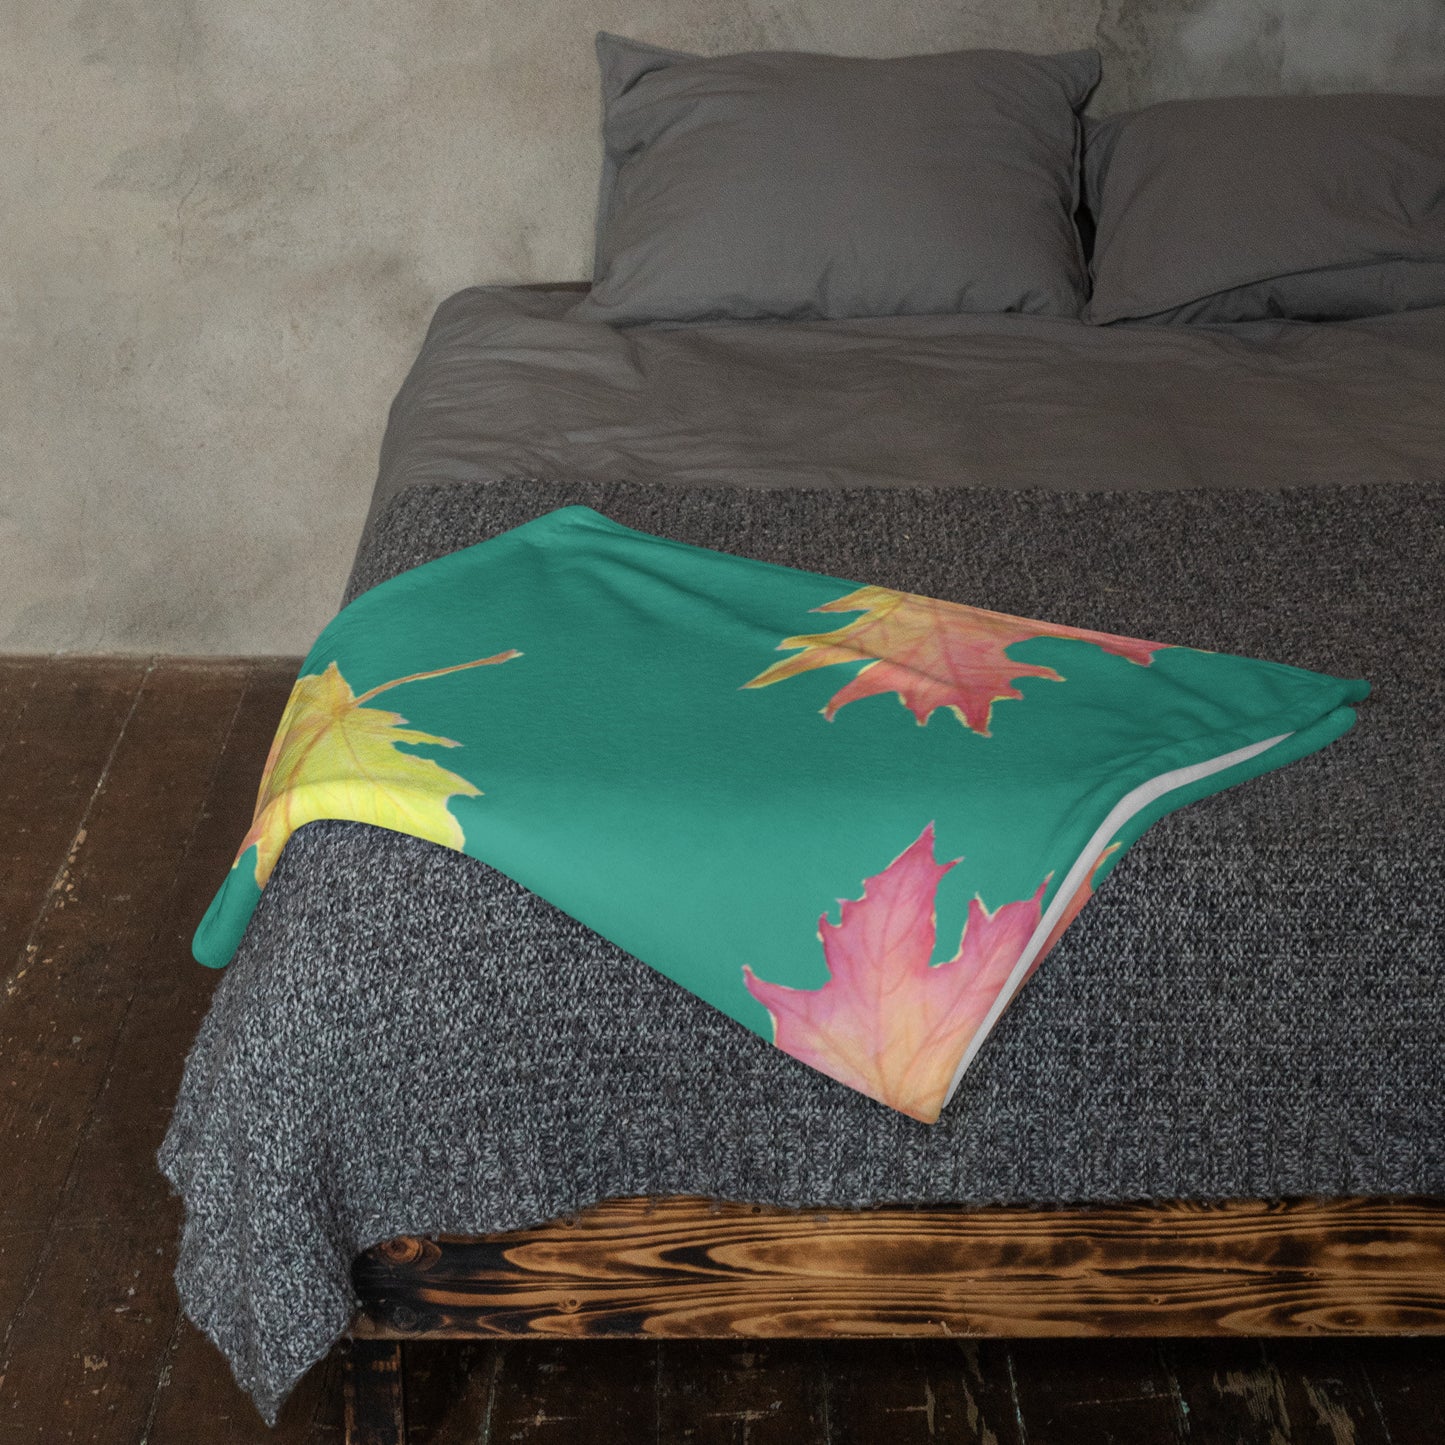 50 by 60 inch soft throw blanket featuring watercolor fall leaves patterned on a dark green background. Shown folded at the foot of a bed.